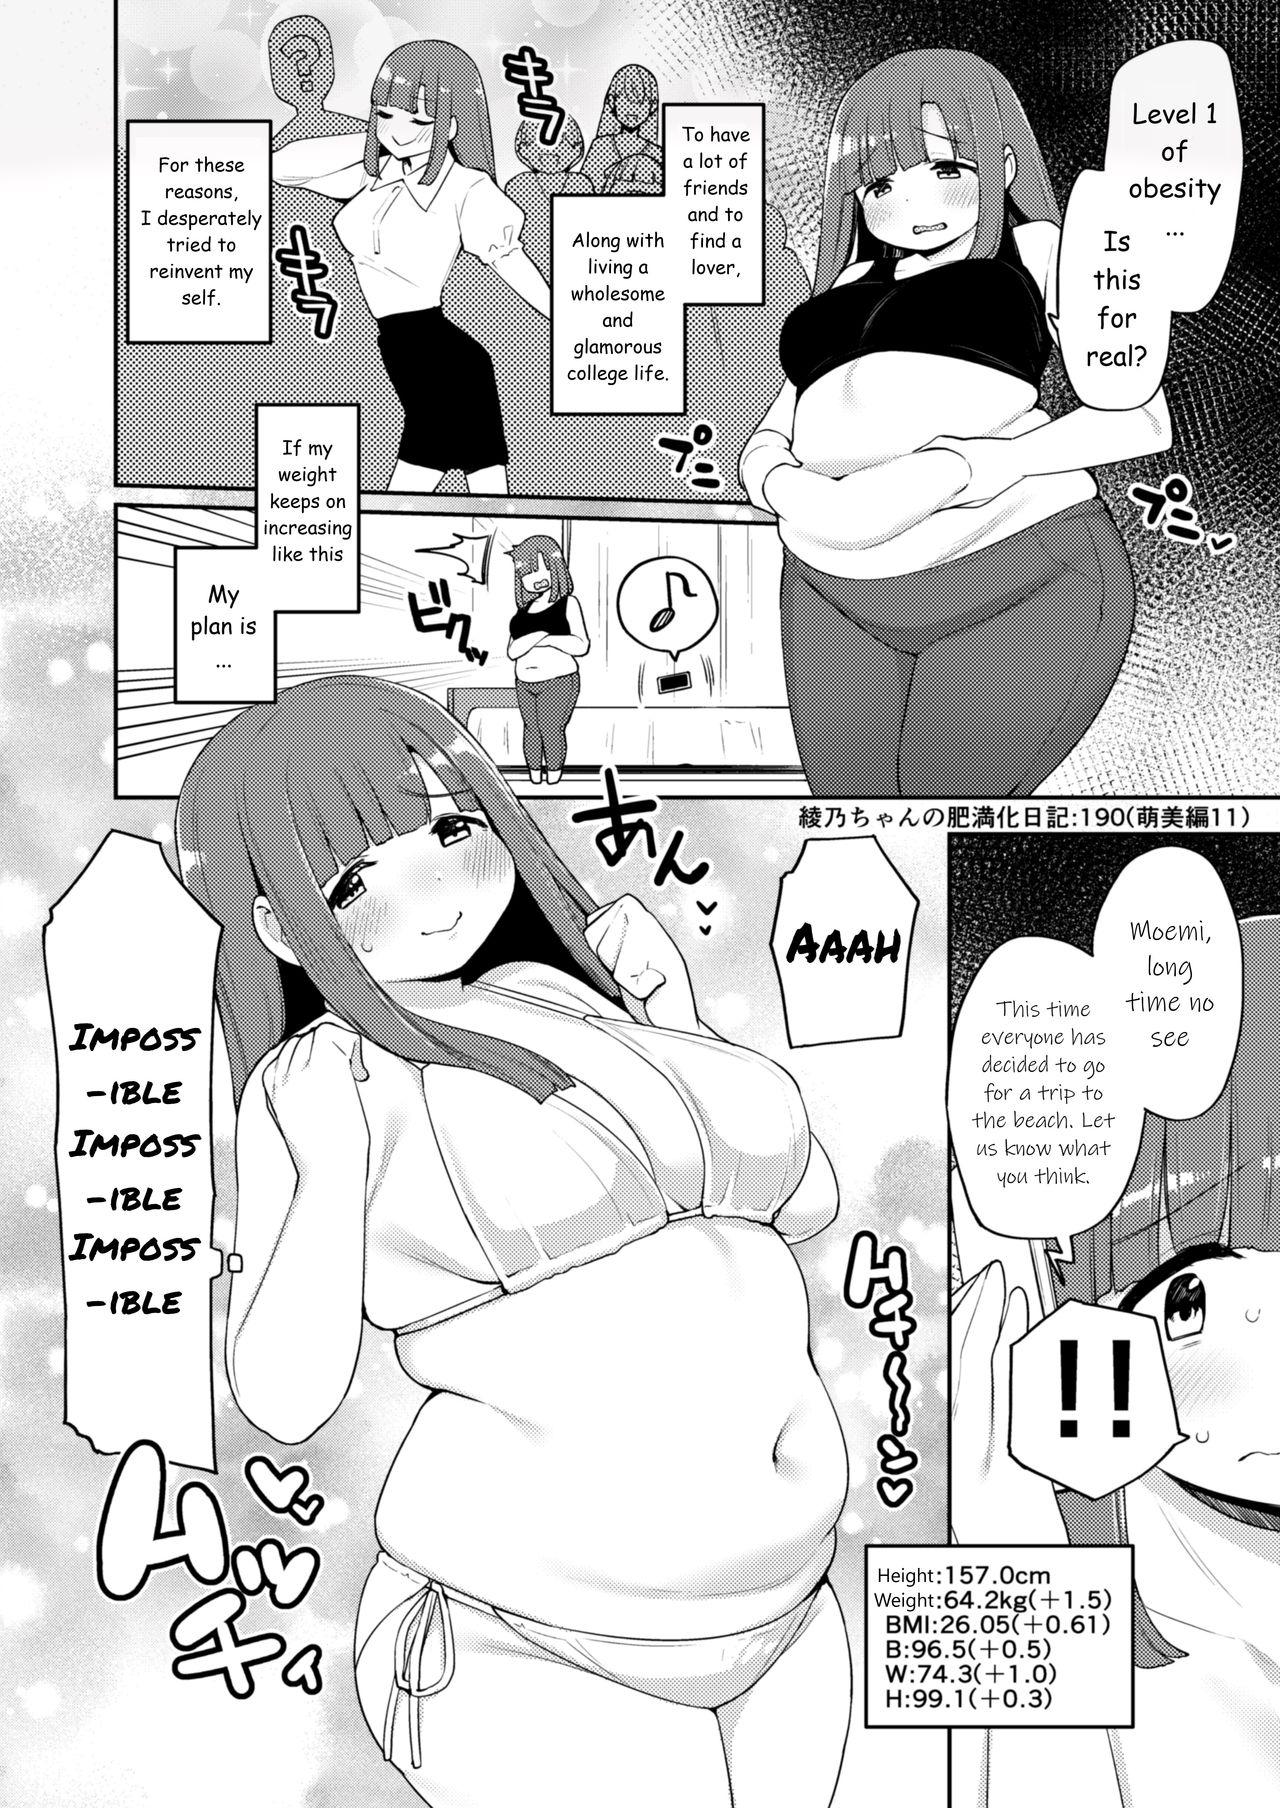 Moneytalks Ayano's Weight Gain Diary Girl - Page 190